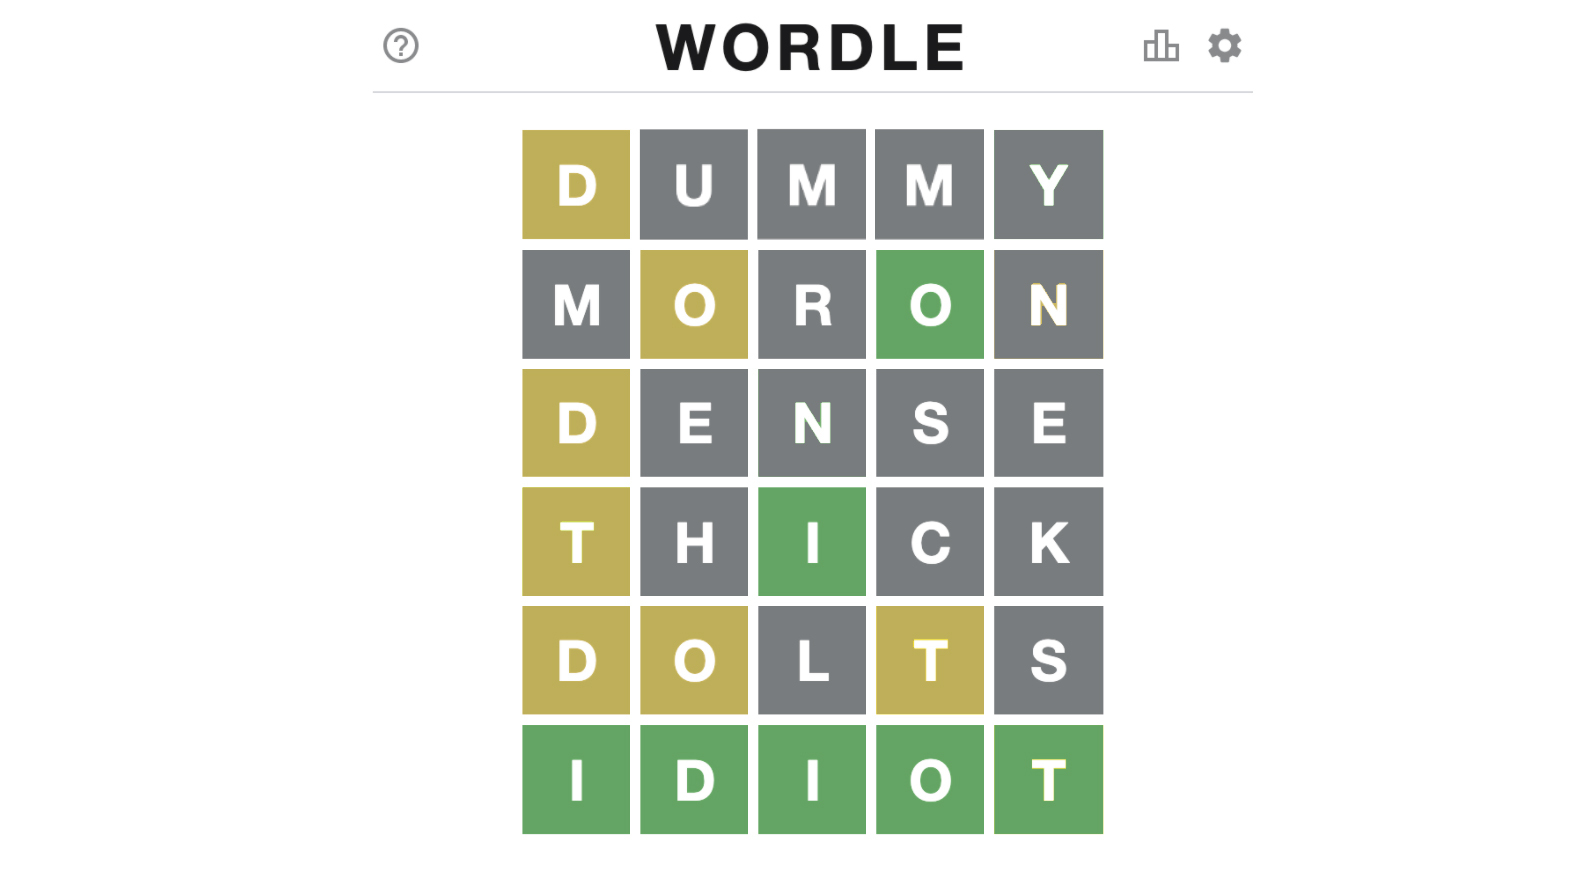 The best games like Wordle